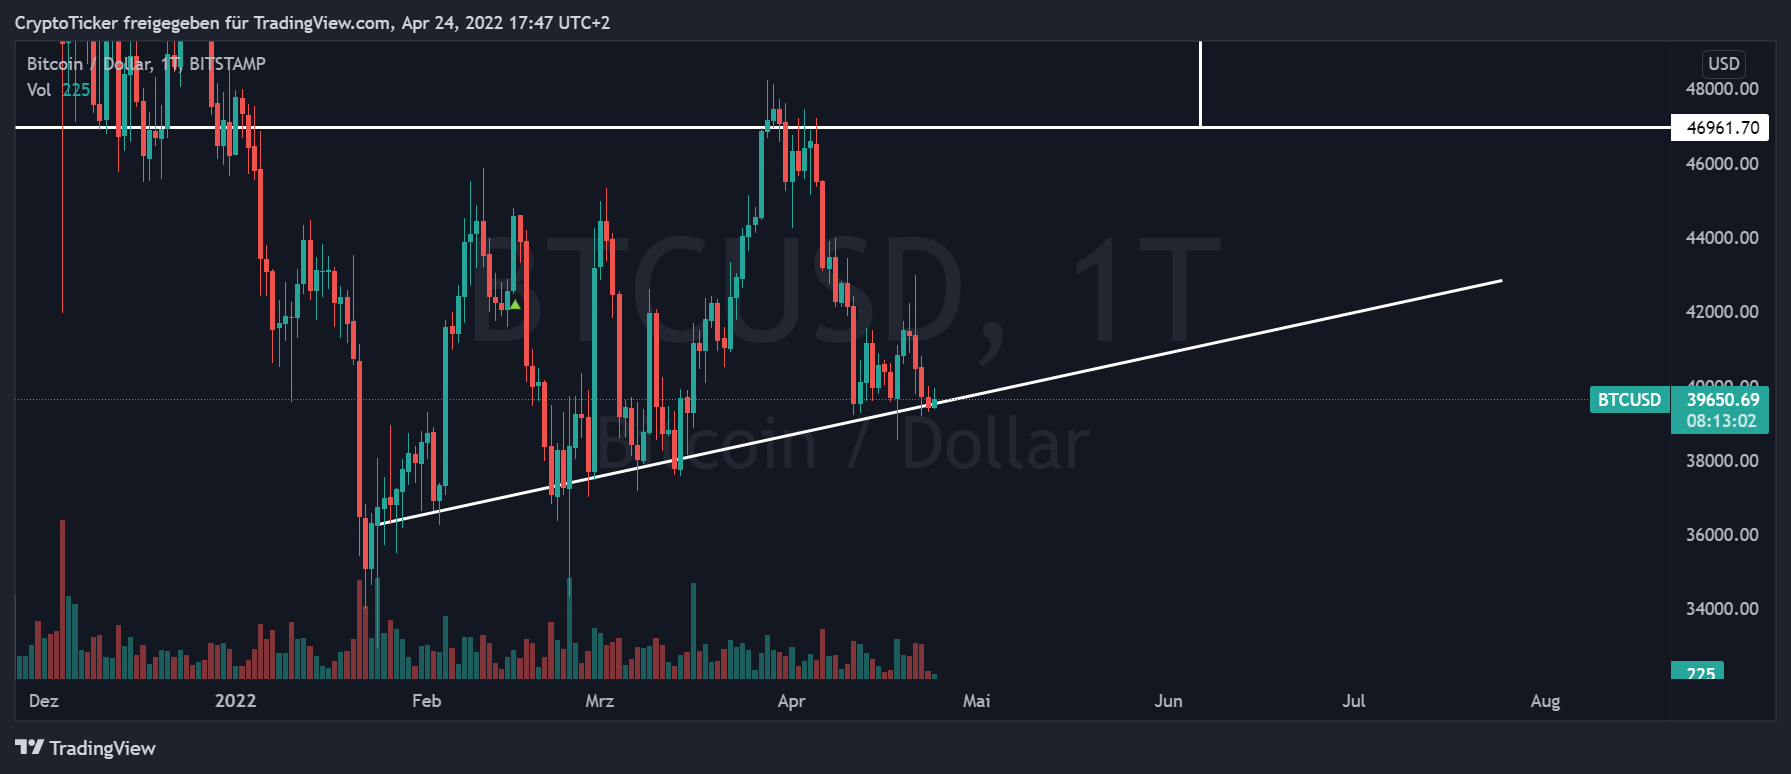 BTC/USD 1-day chart showing the uptrend in Bitcoin price